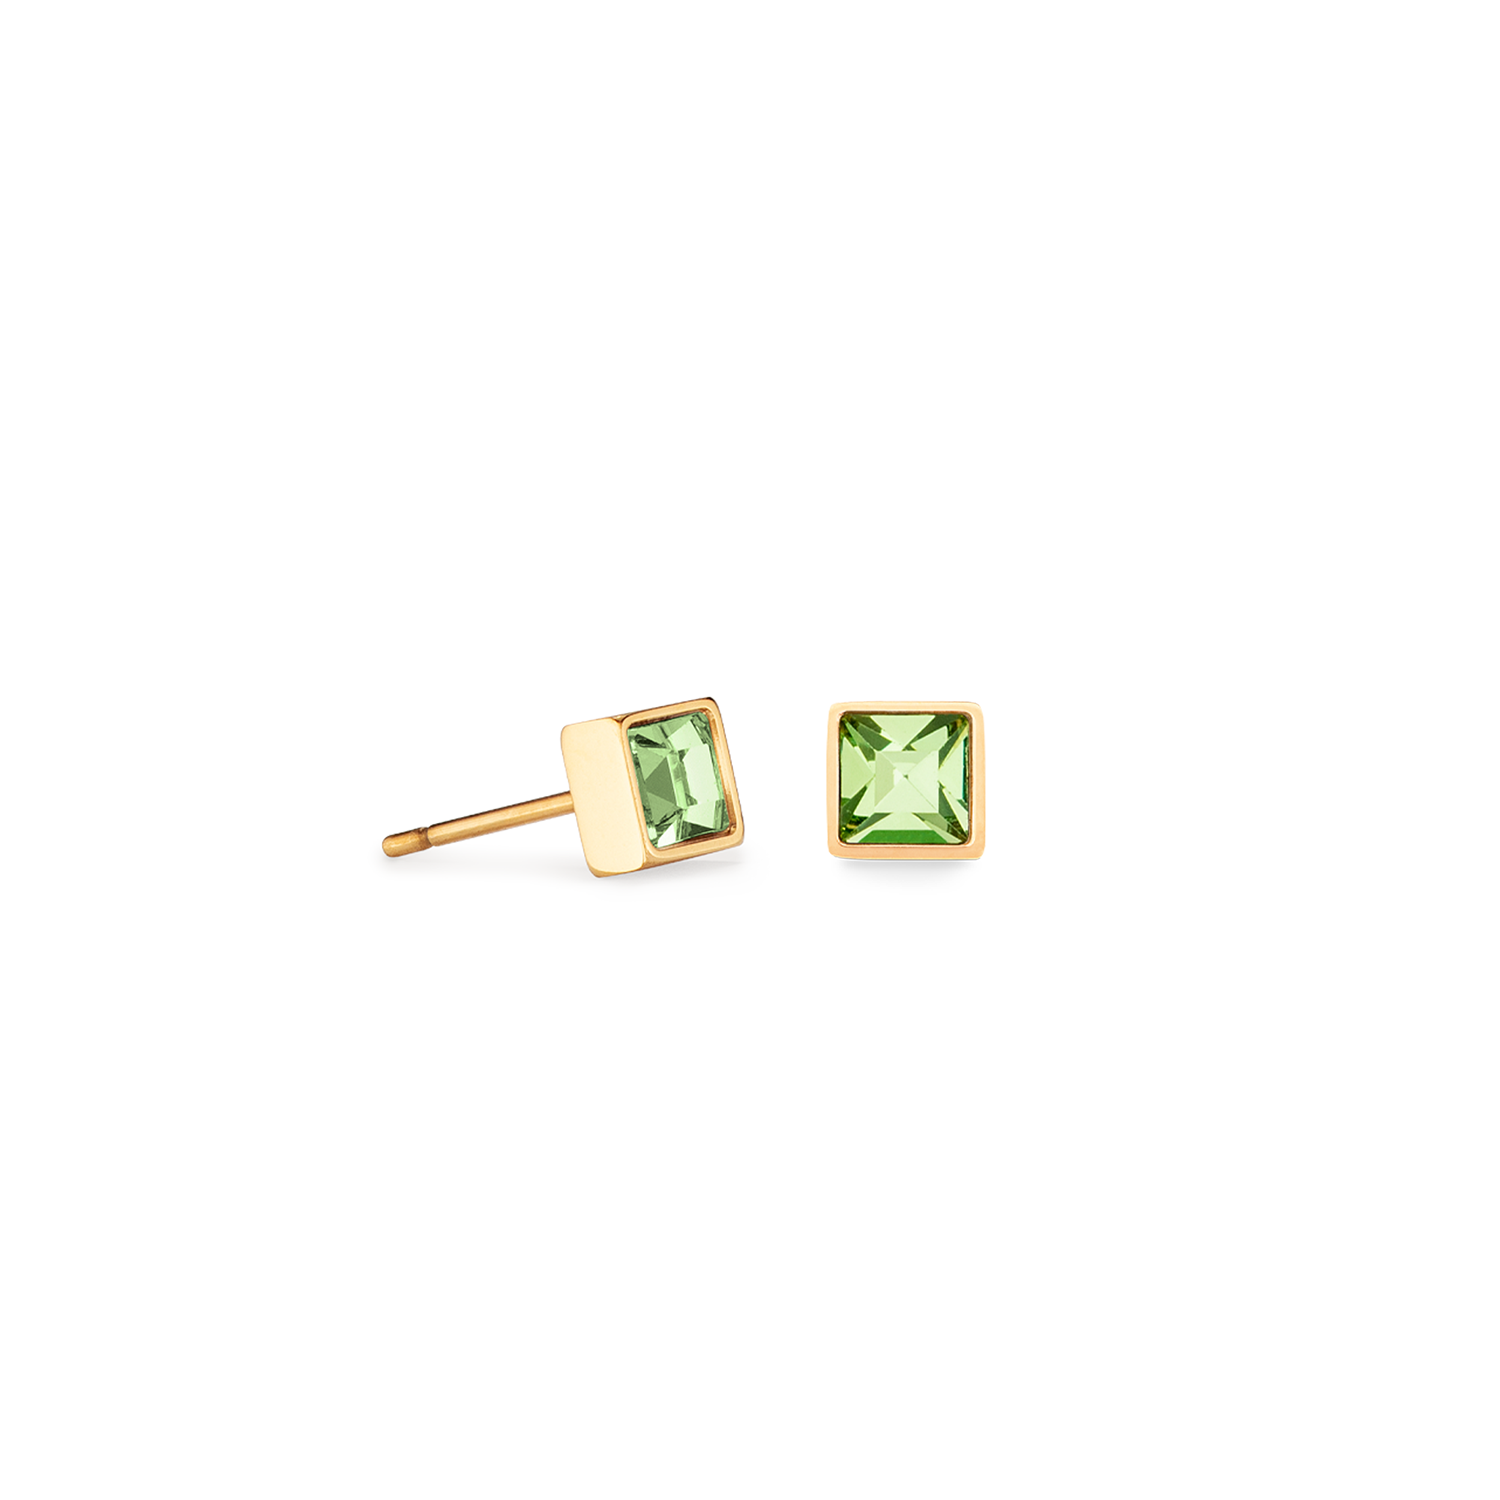 COEUR DE LION Brilliant Square Small Stud Earrings with Crystals - Lime Green